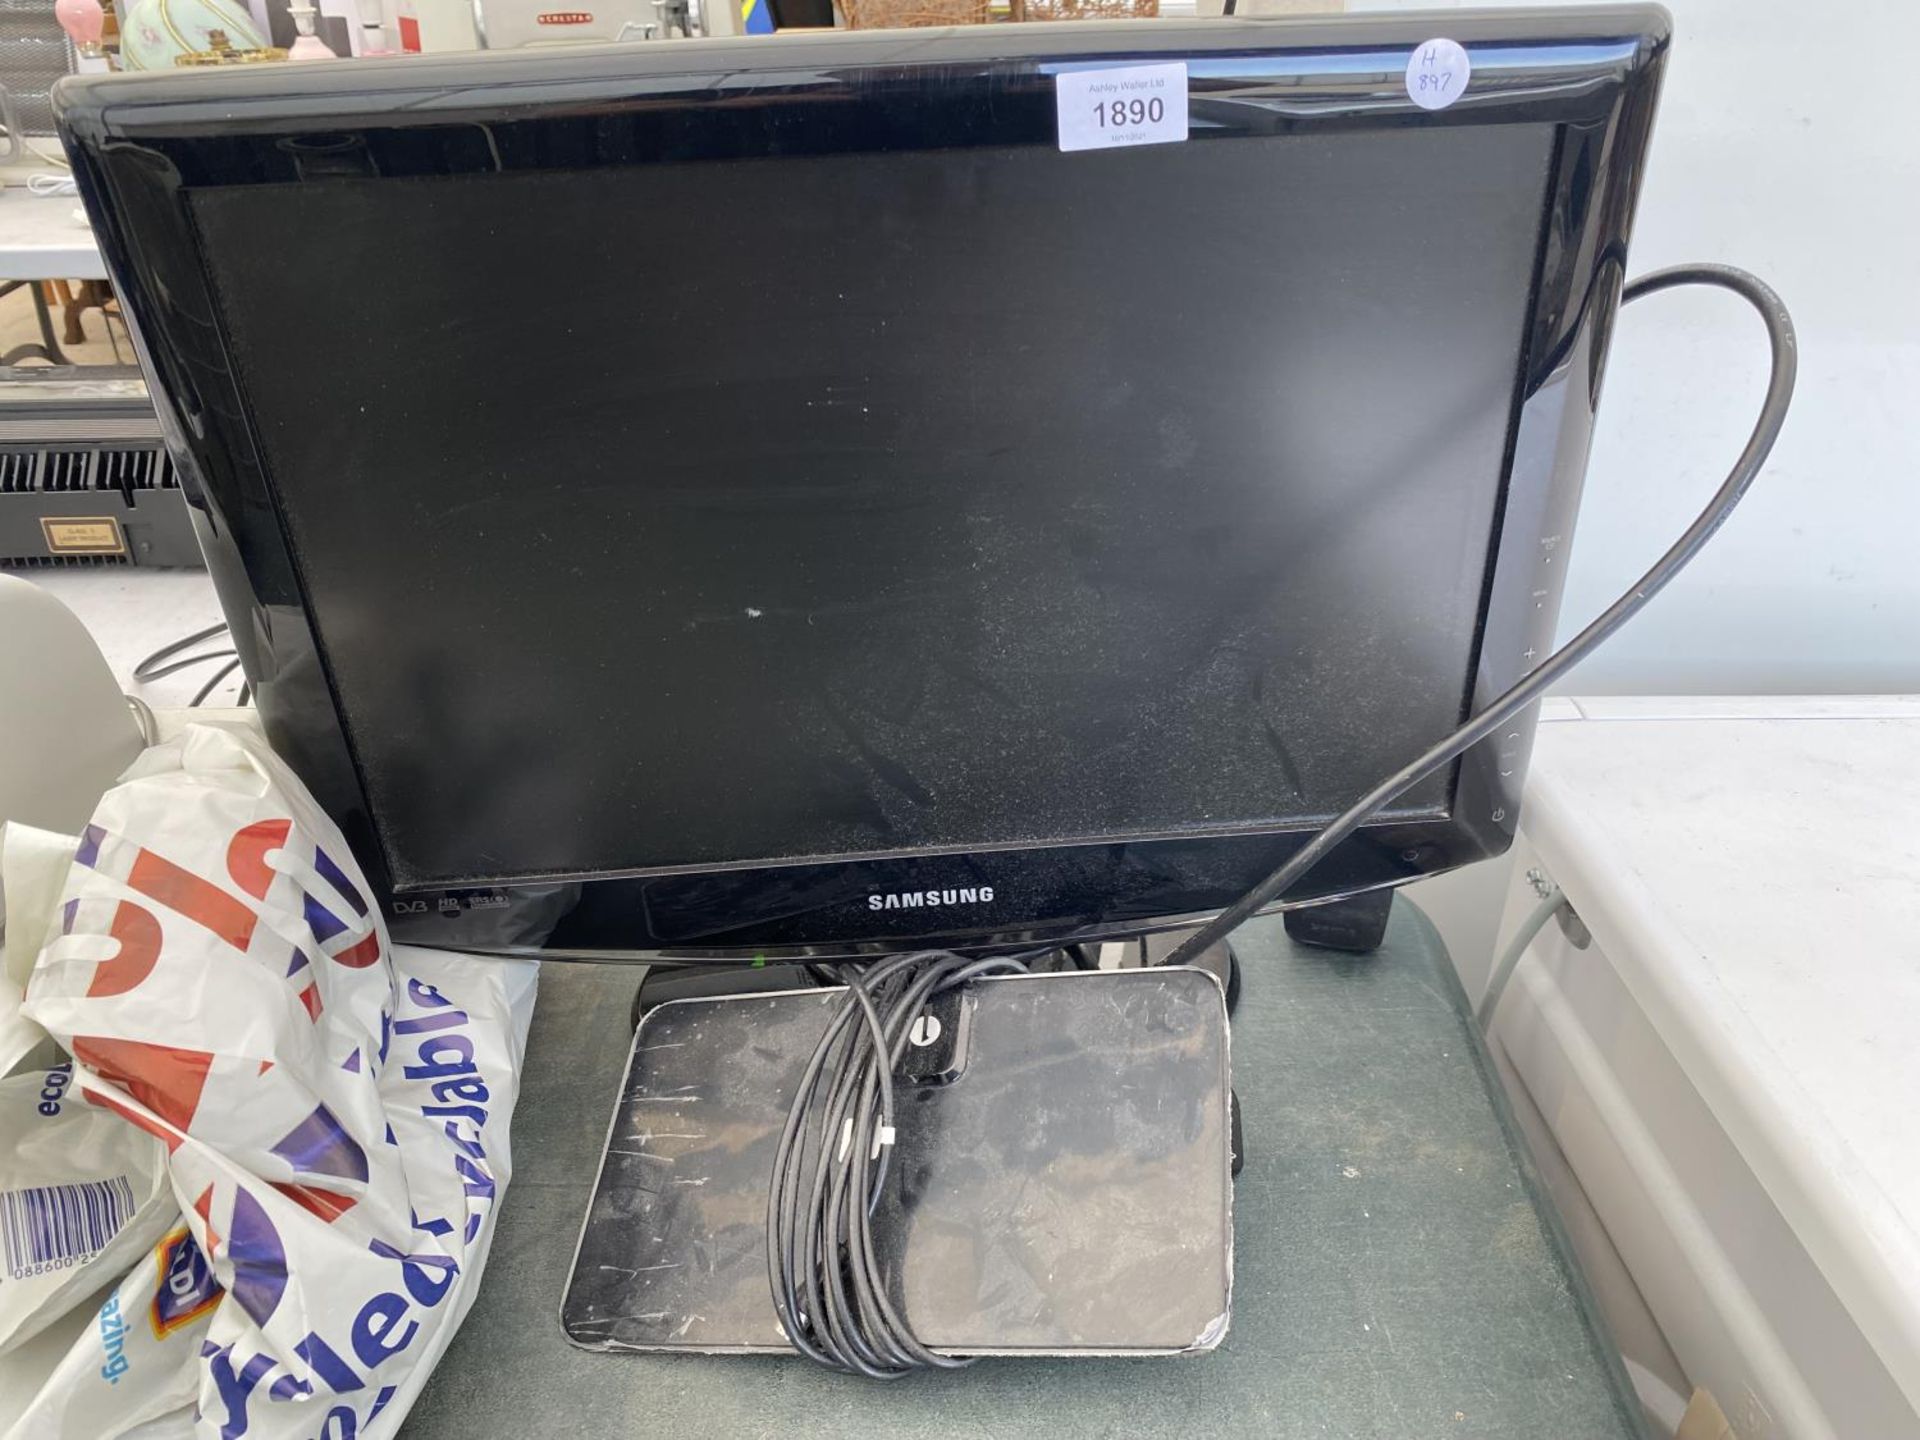 A SAMSUNG 19" TELEVISION WITH REMOTE CONTROL